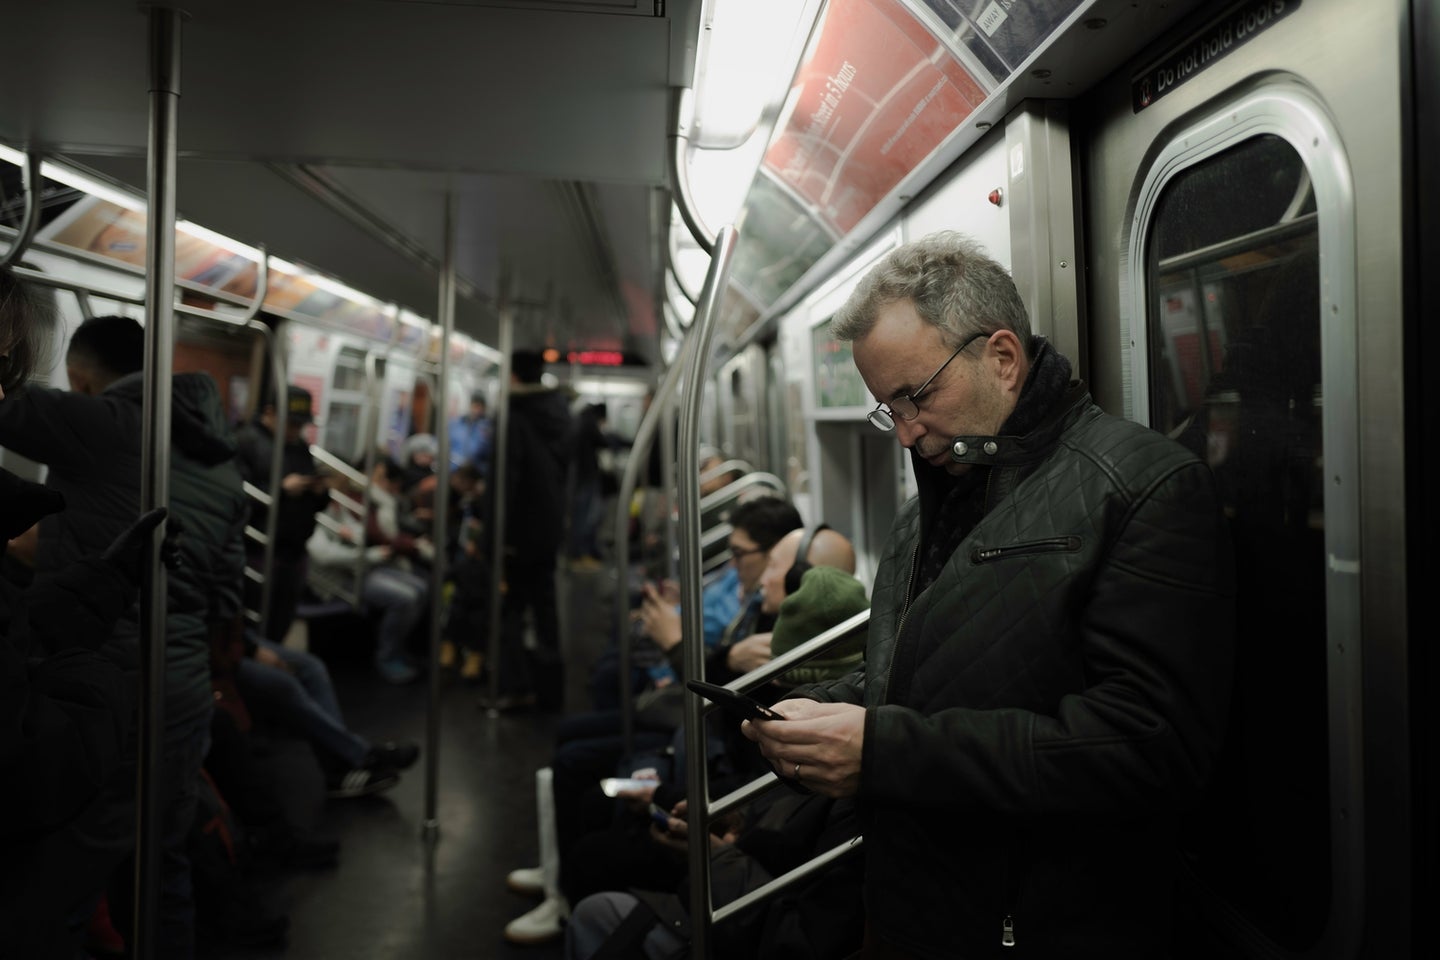 a man using his phone on the New York City subway, while other passengers also use their phones